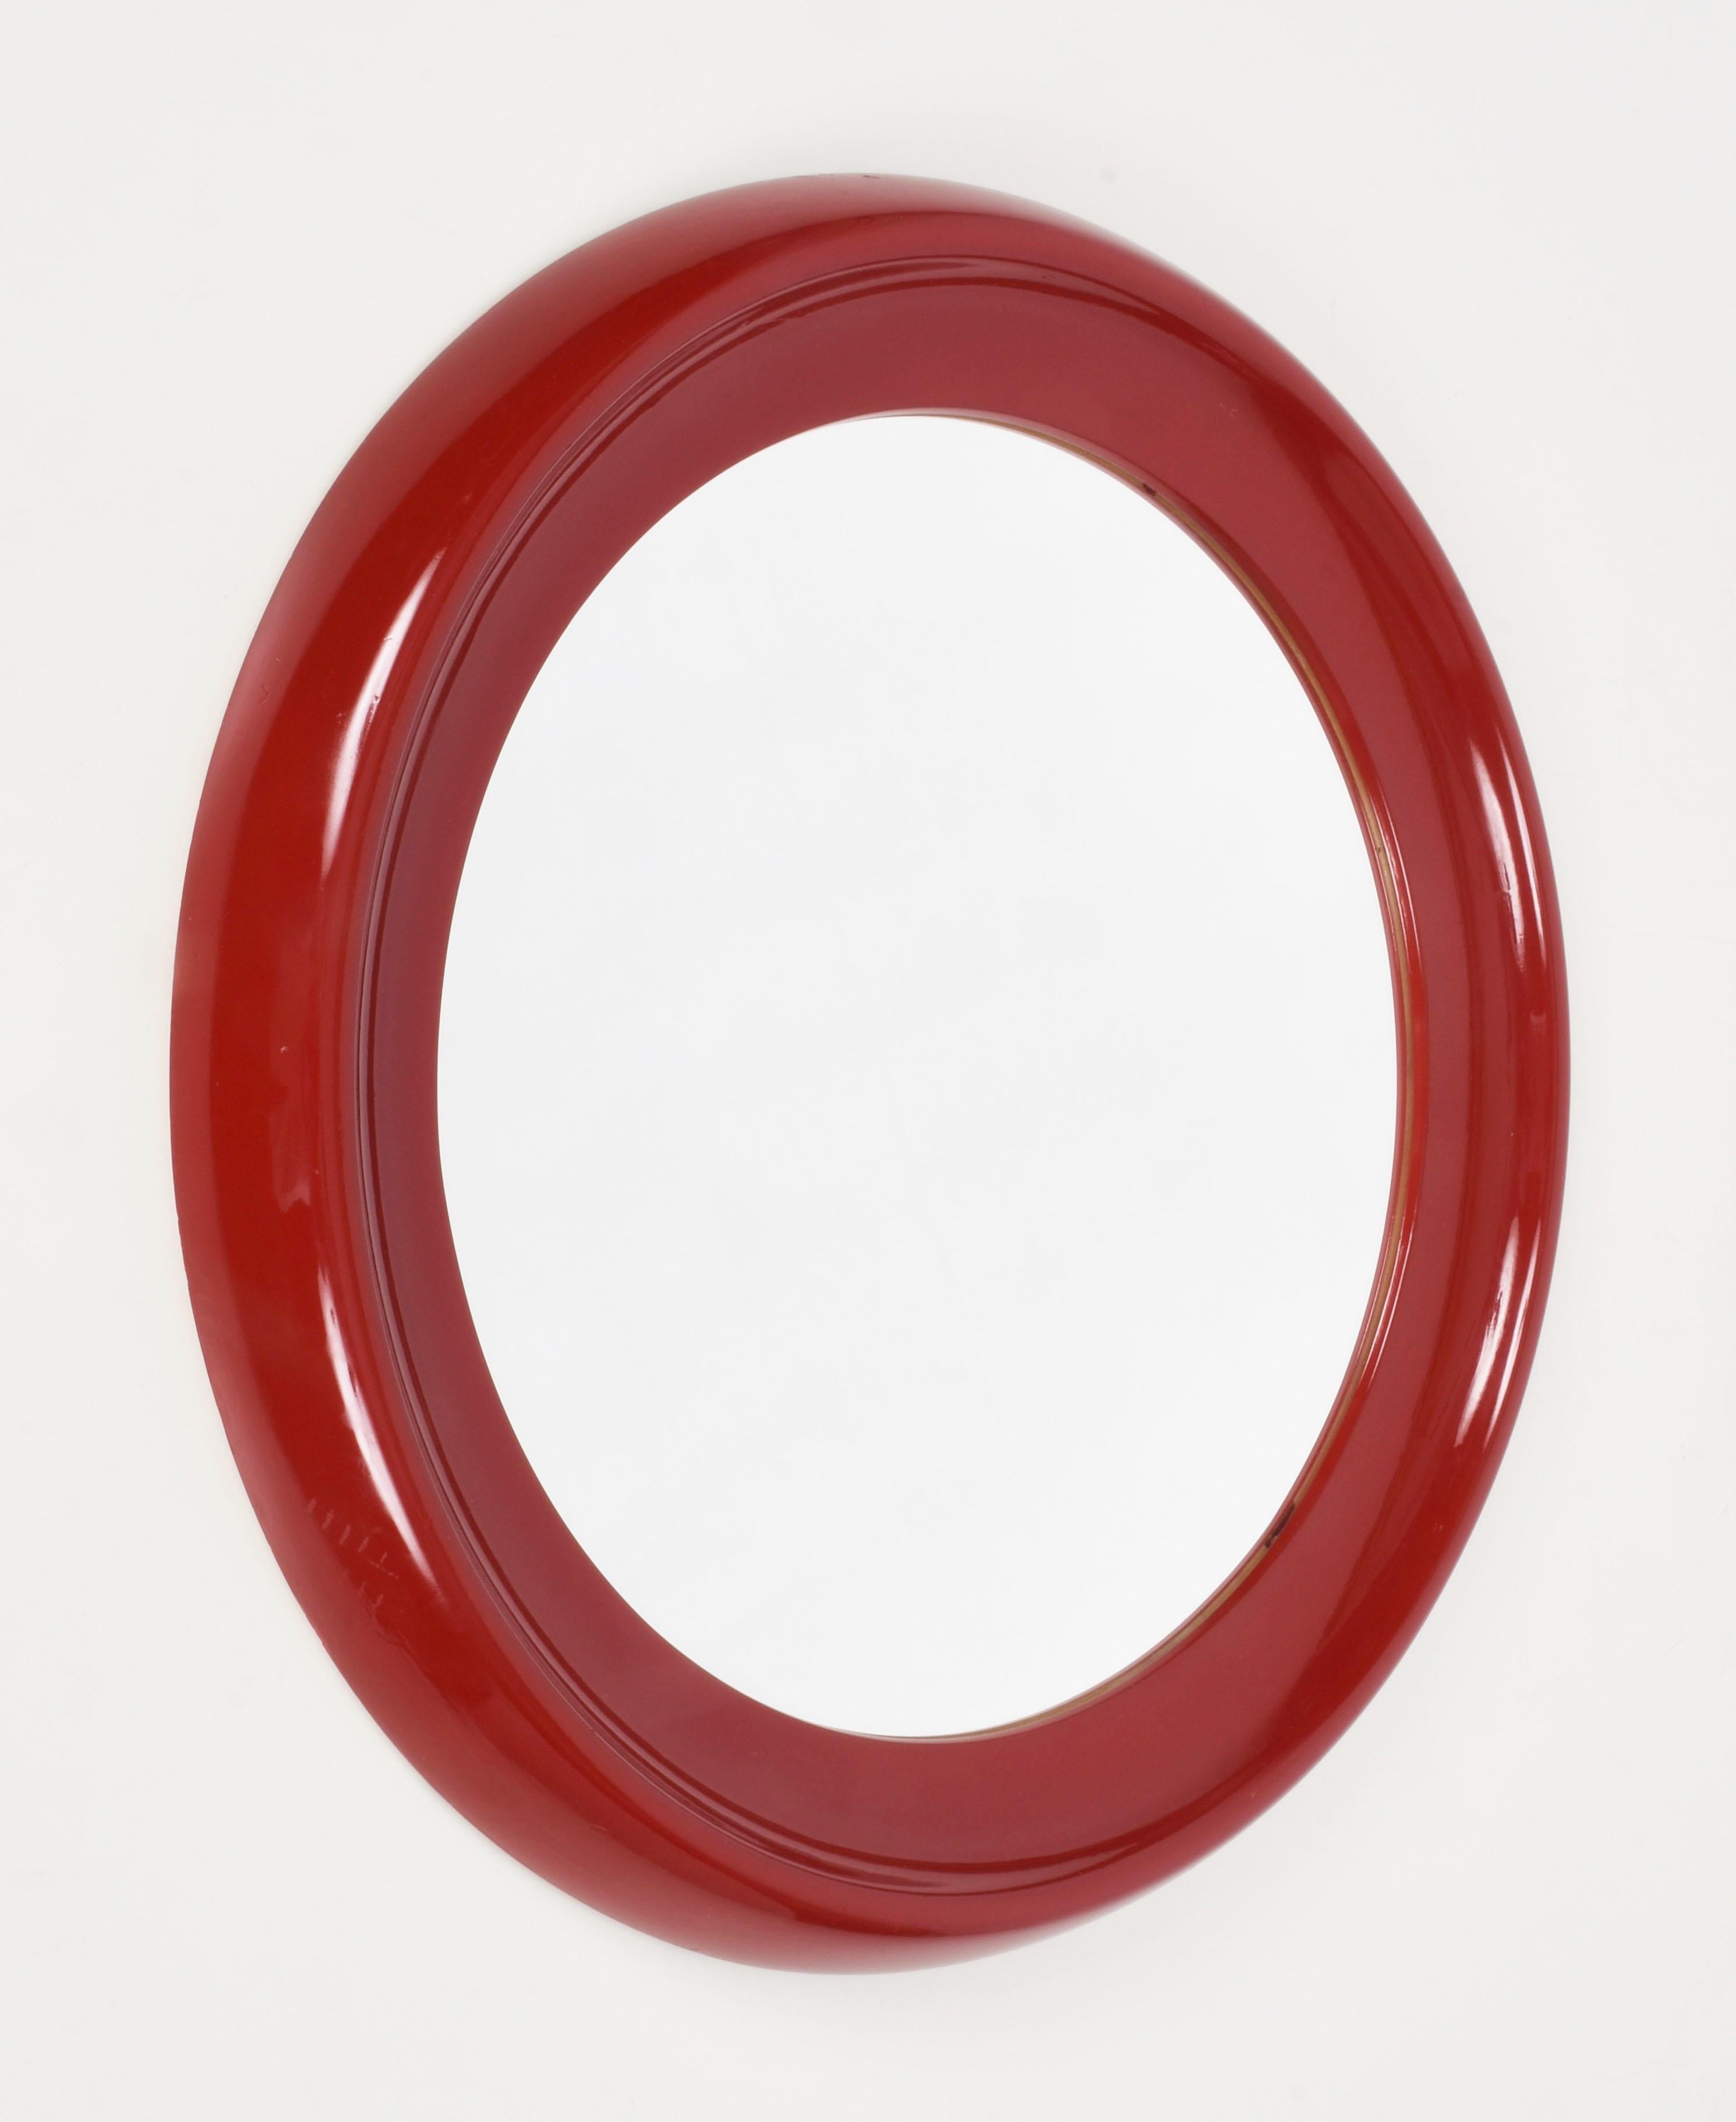 European Midcentury Round Italian Mirror with Red Lacquered Resin Frame, 1970s